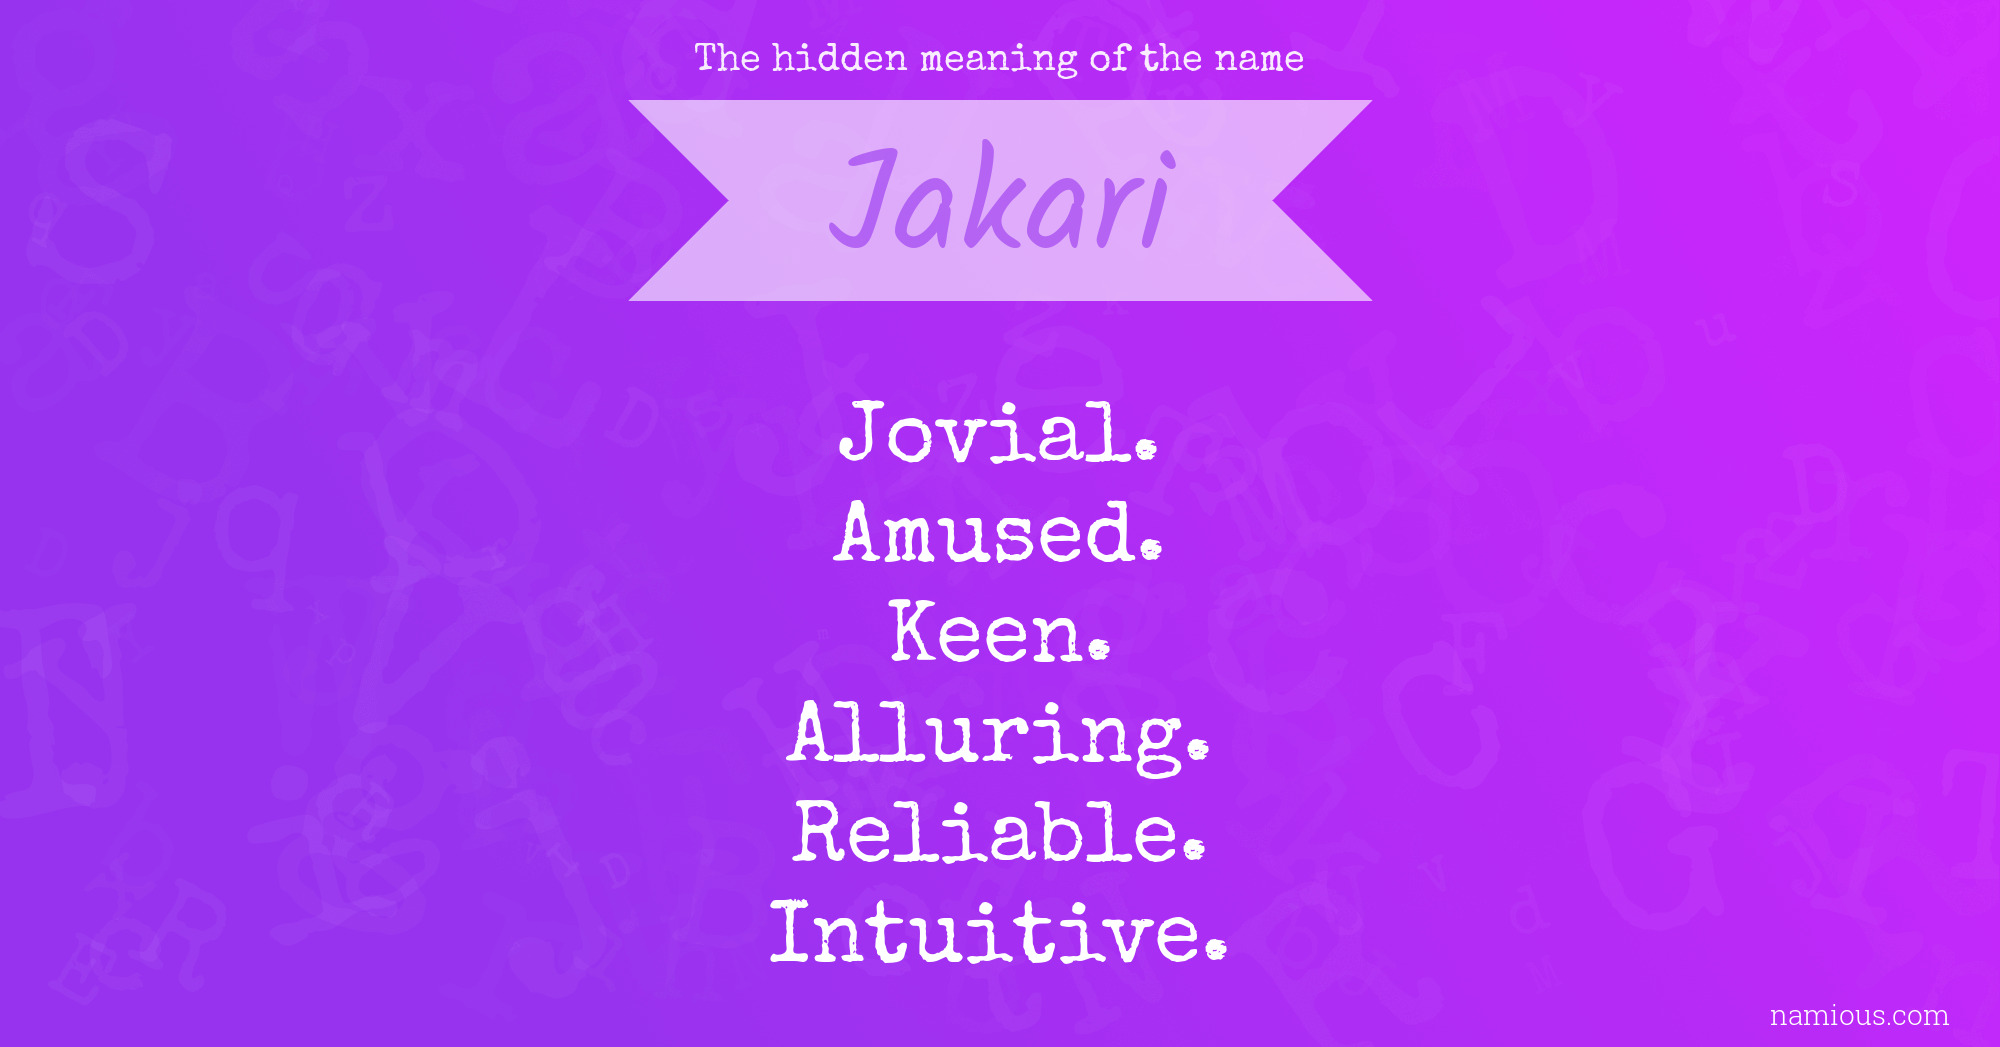 The hidden meaning of the name Jakari